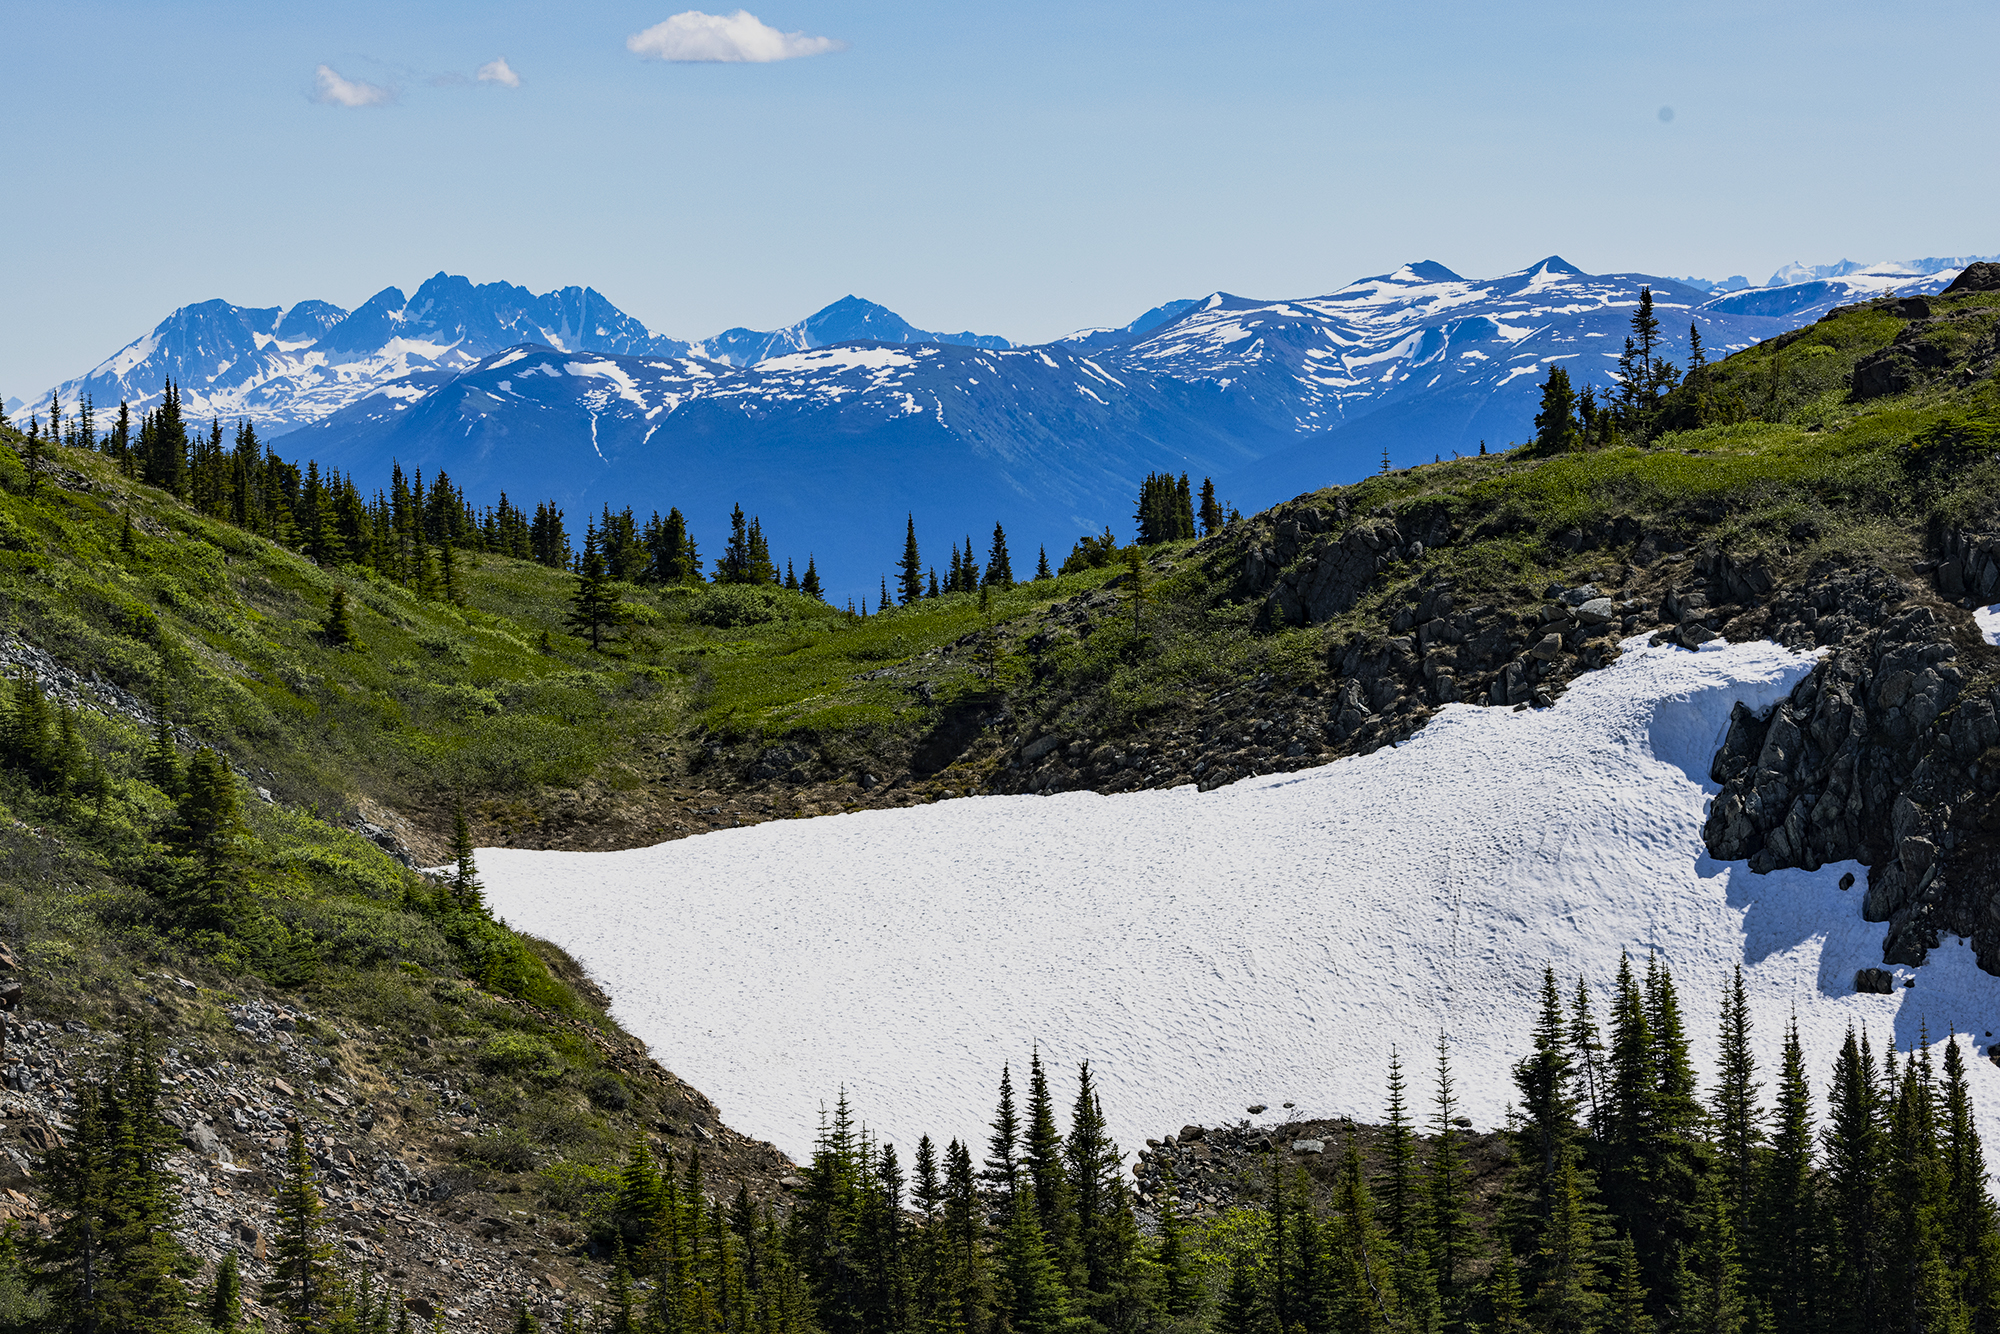 A view from Monarch Mountain Trail, near Atlin, B.C., pictured on July 3, 2021. (Steve Silva)